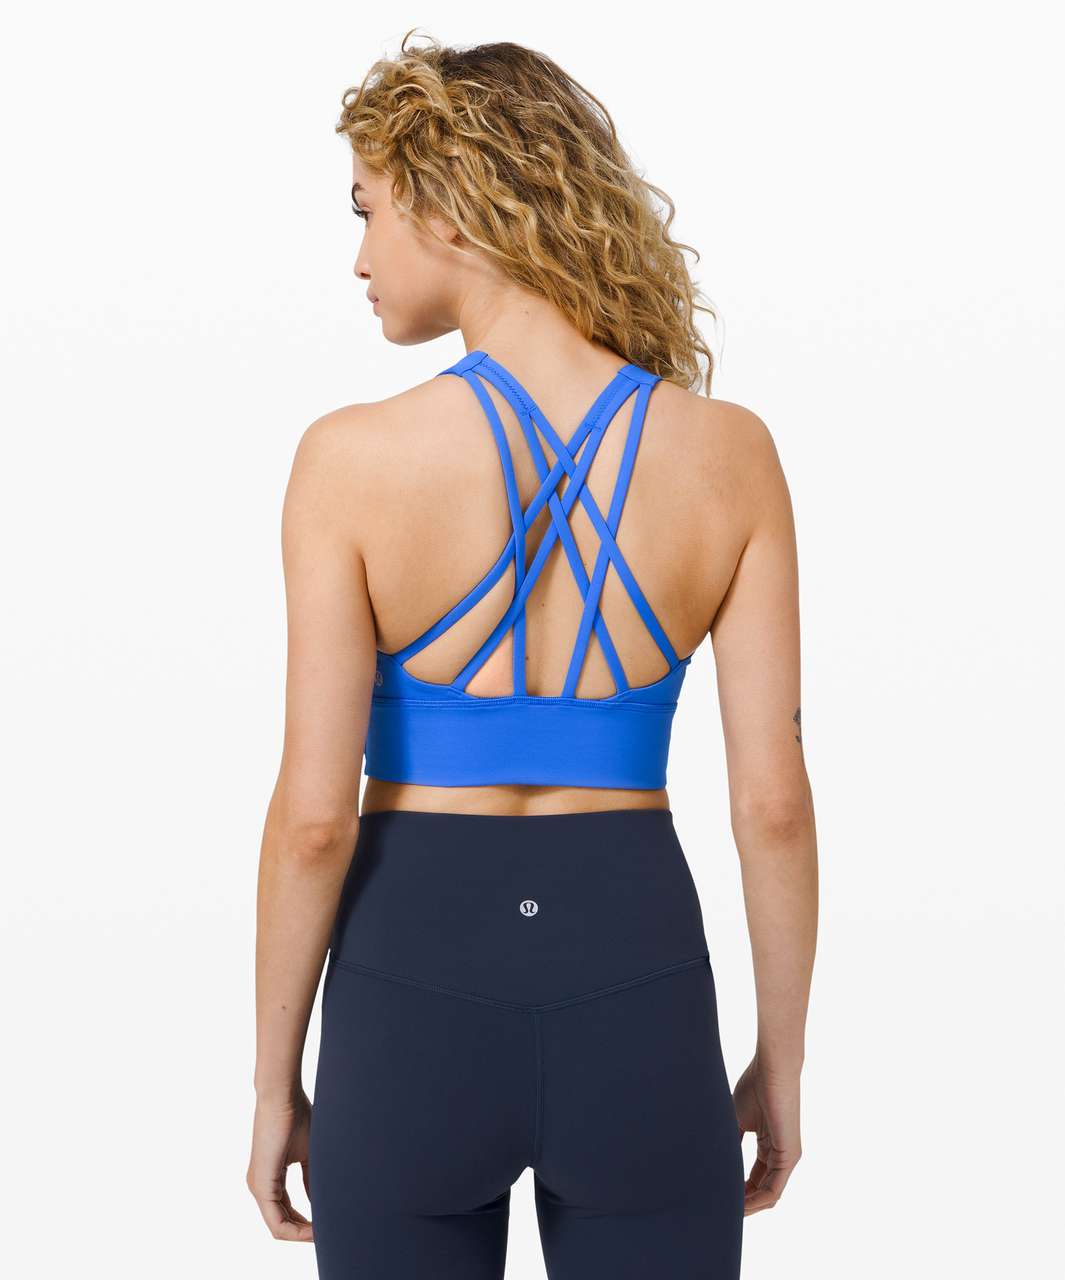 Lululemon Free To Be Serene Bra Long Line *Light Support, C/D Cup (Online Only) - Wild Bluebell